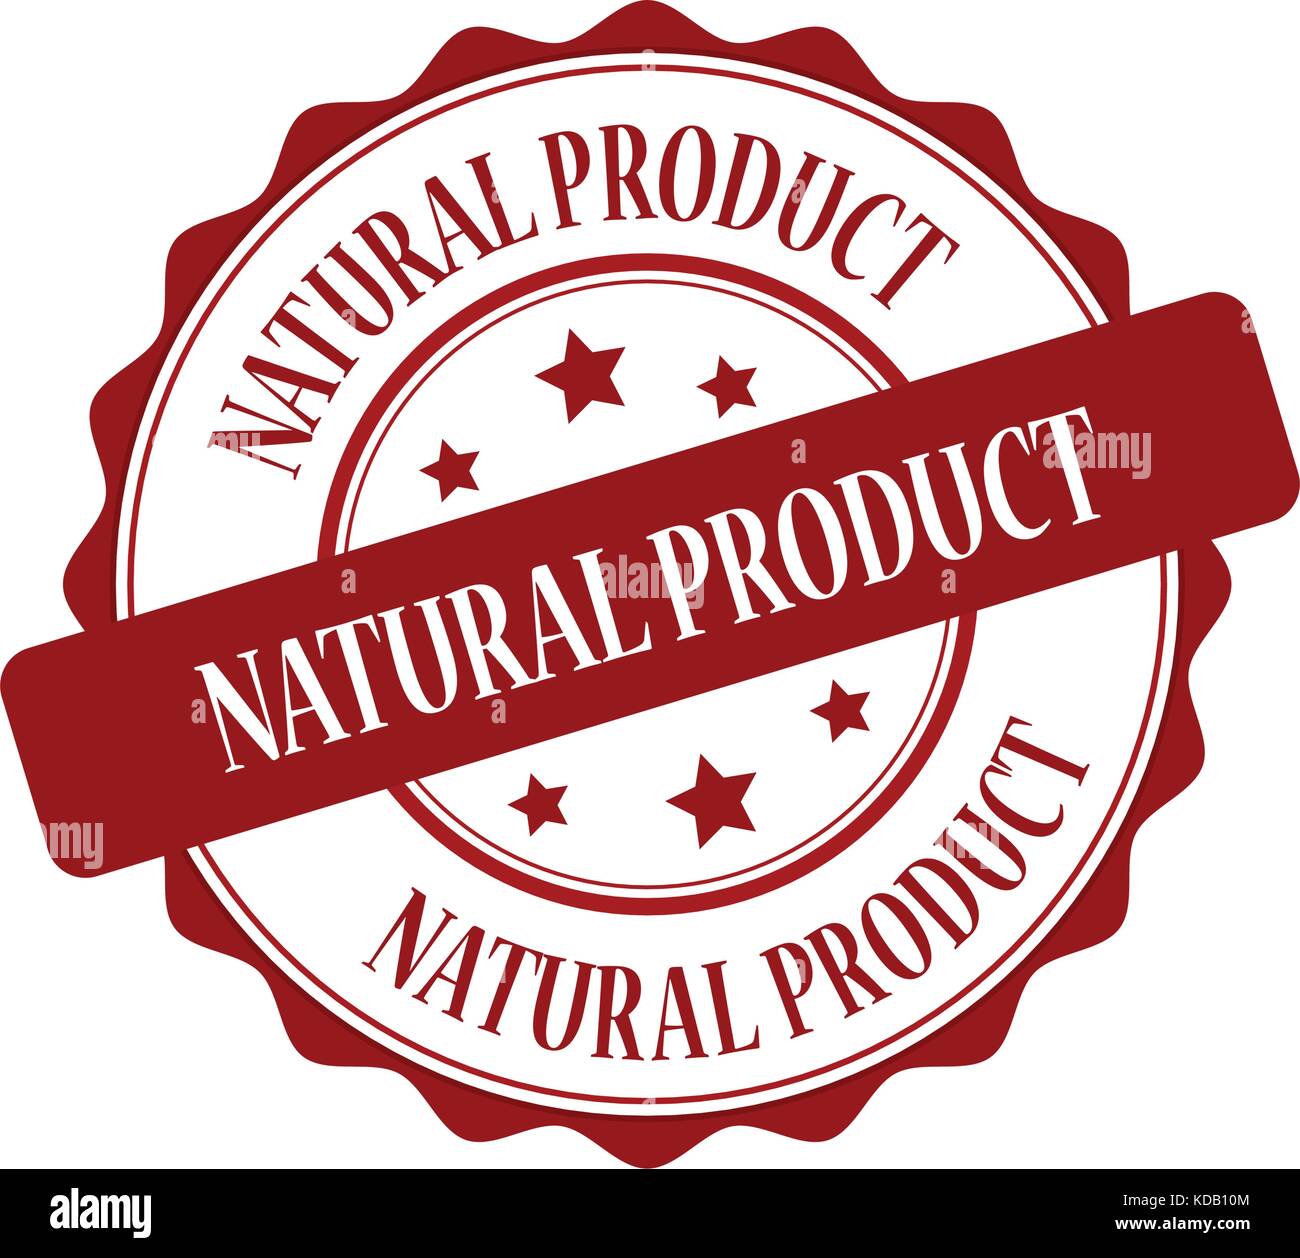 Natural product red stamp illustration Stock Vector